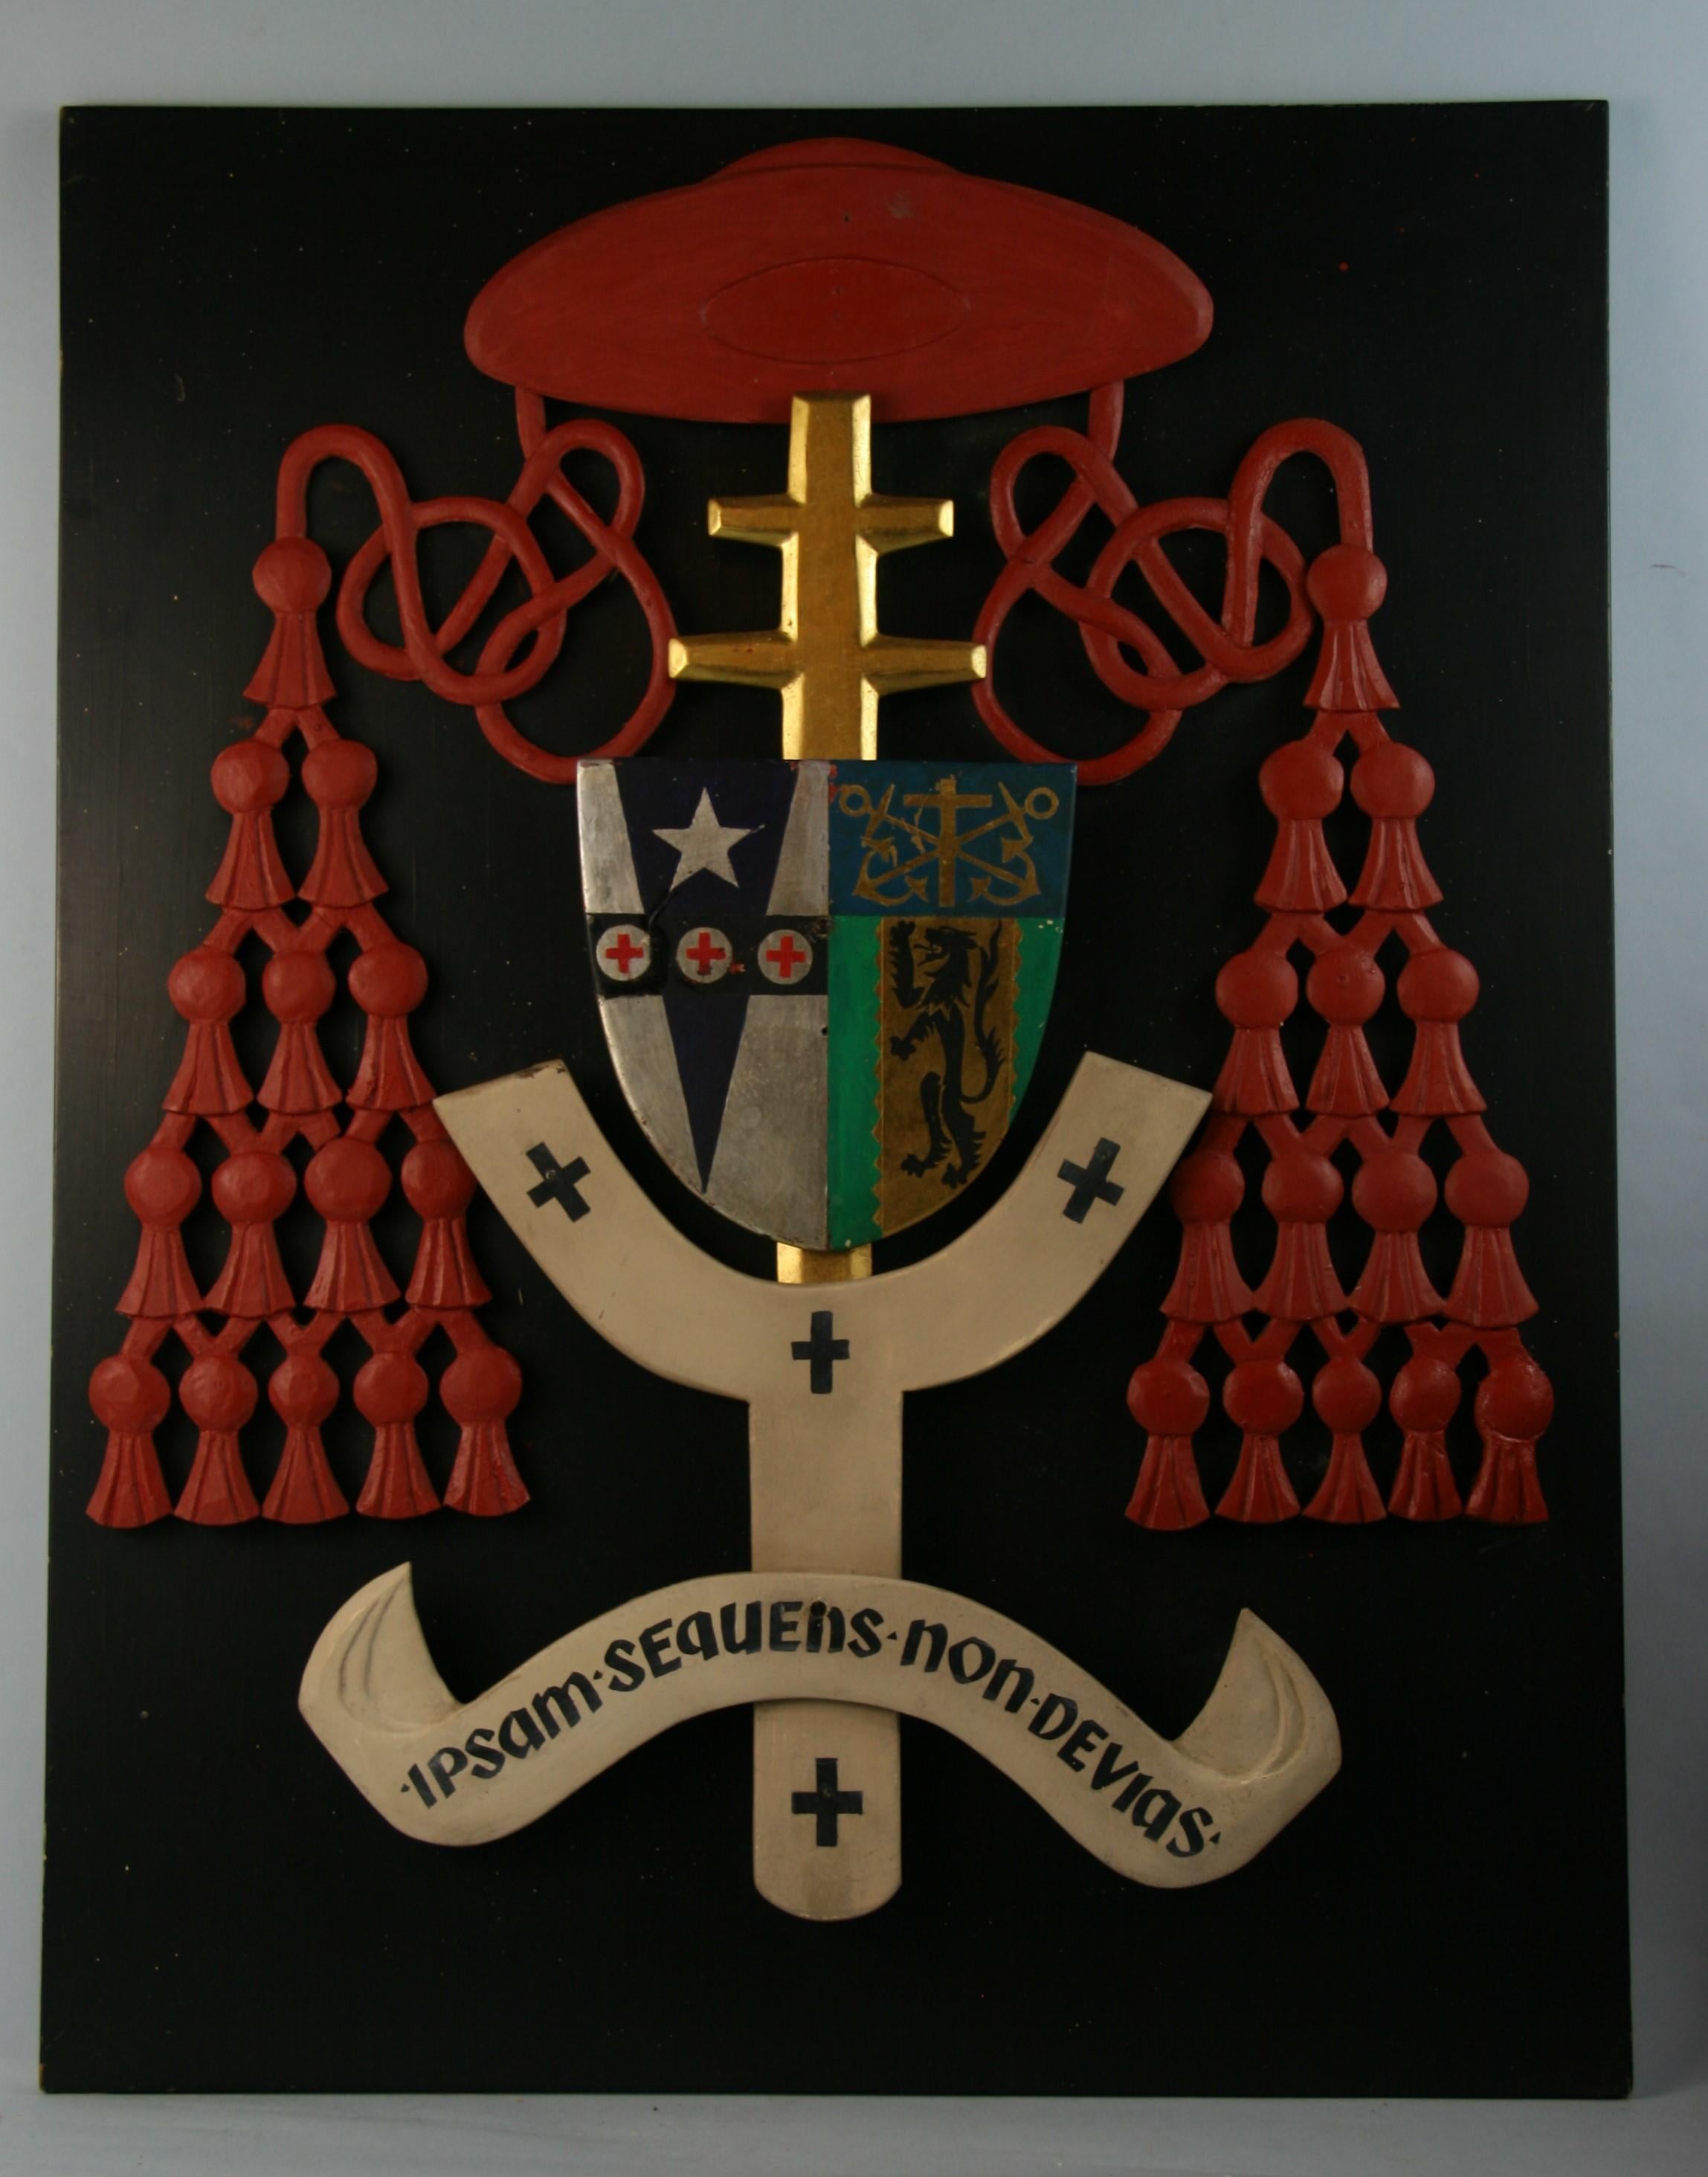 3-662 Italian heraldry ecclesiastic plaque for a high ranking Cardinal hand made and painted 
The hat is known as a galero and the tassels are called fiocchi.
It represent the Cardinal's Coat of Arms.
The number of tassels shown on this coat of arms